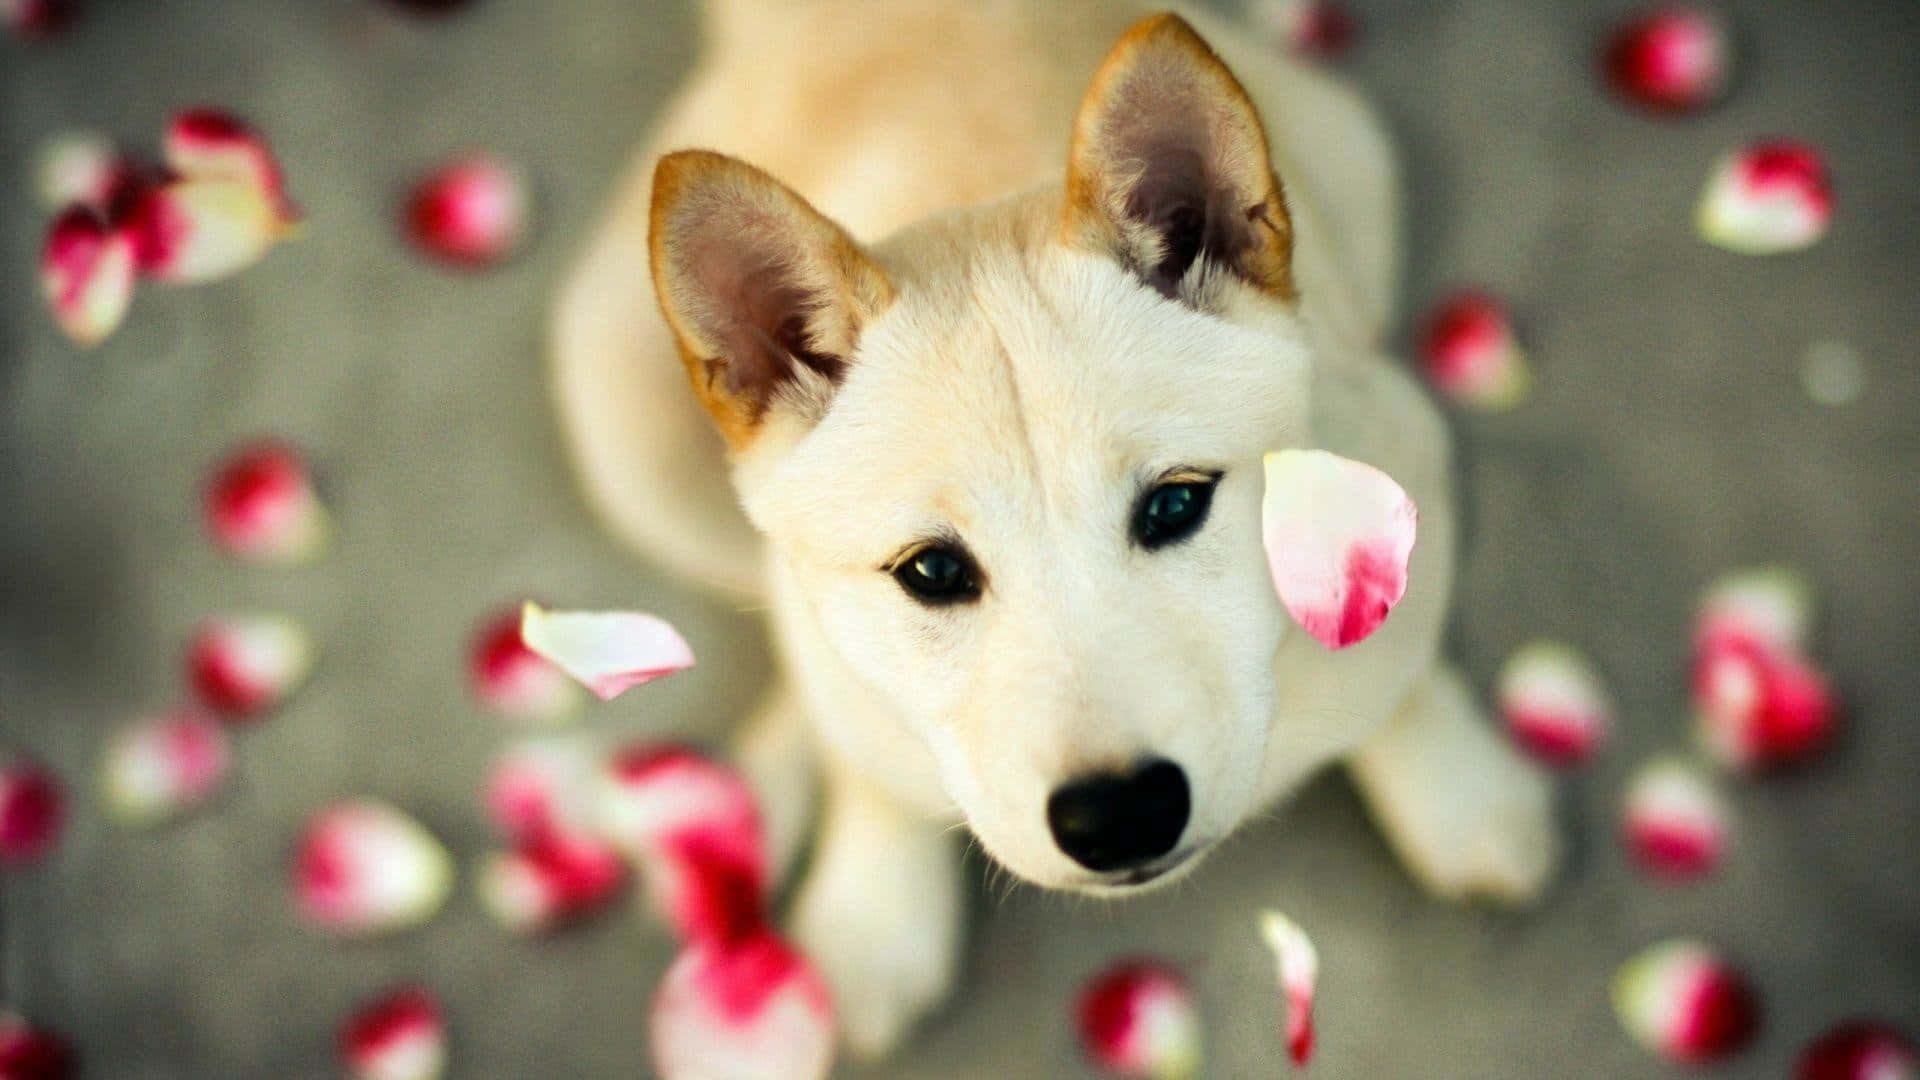 Cute Animal Flower Dog Picture